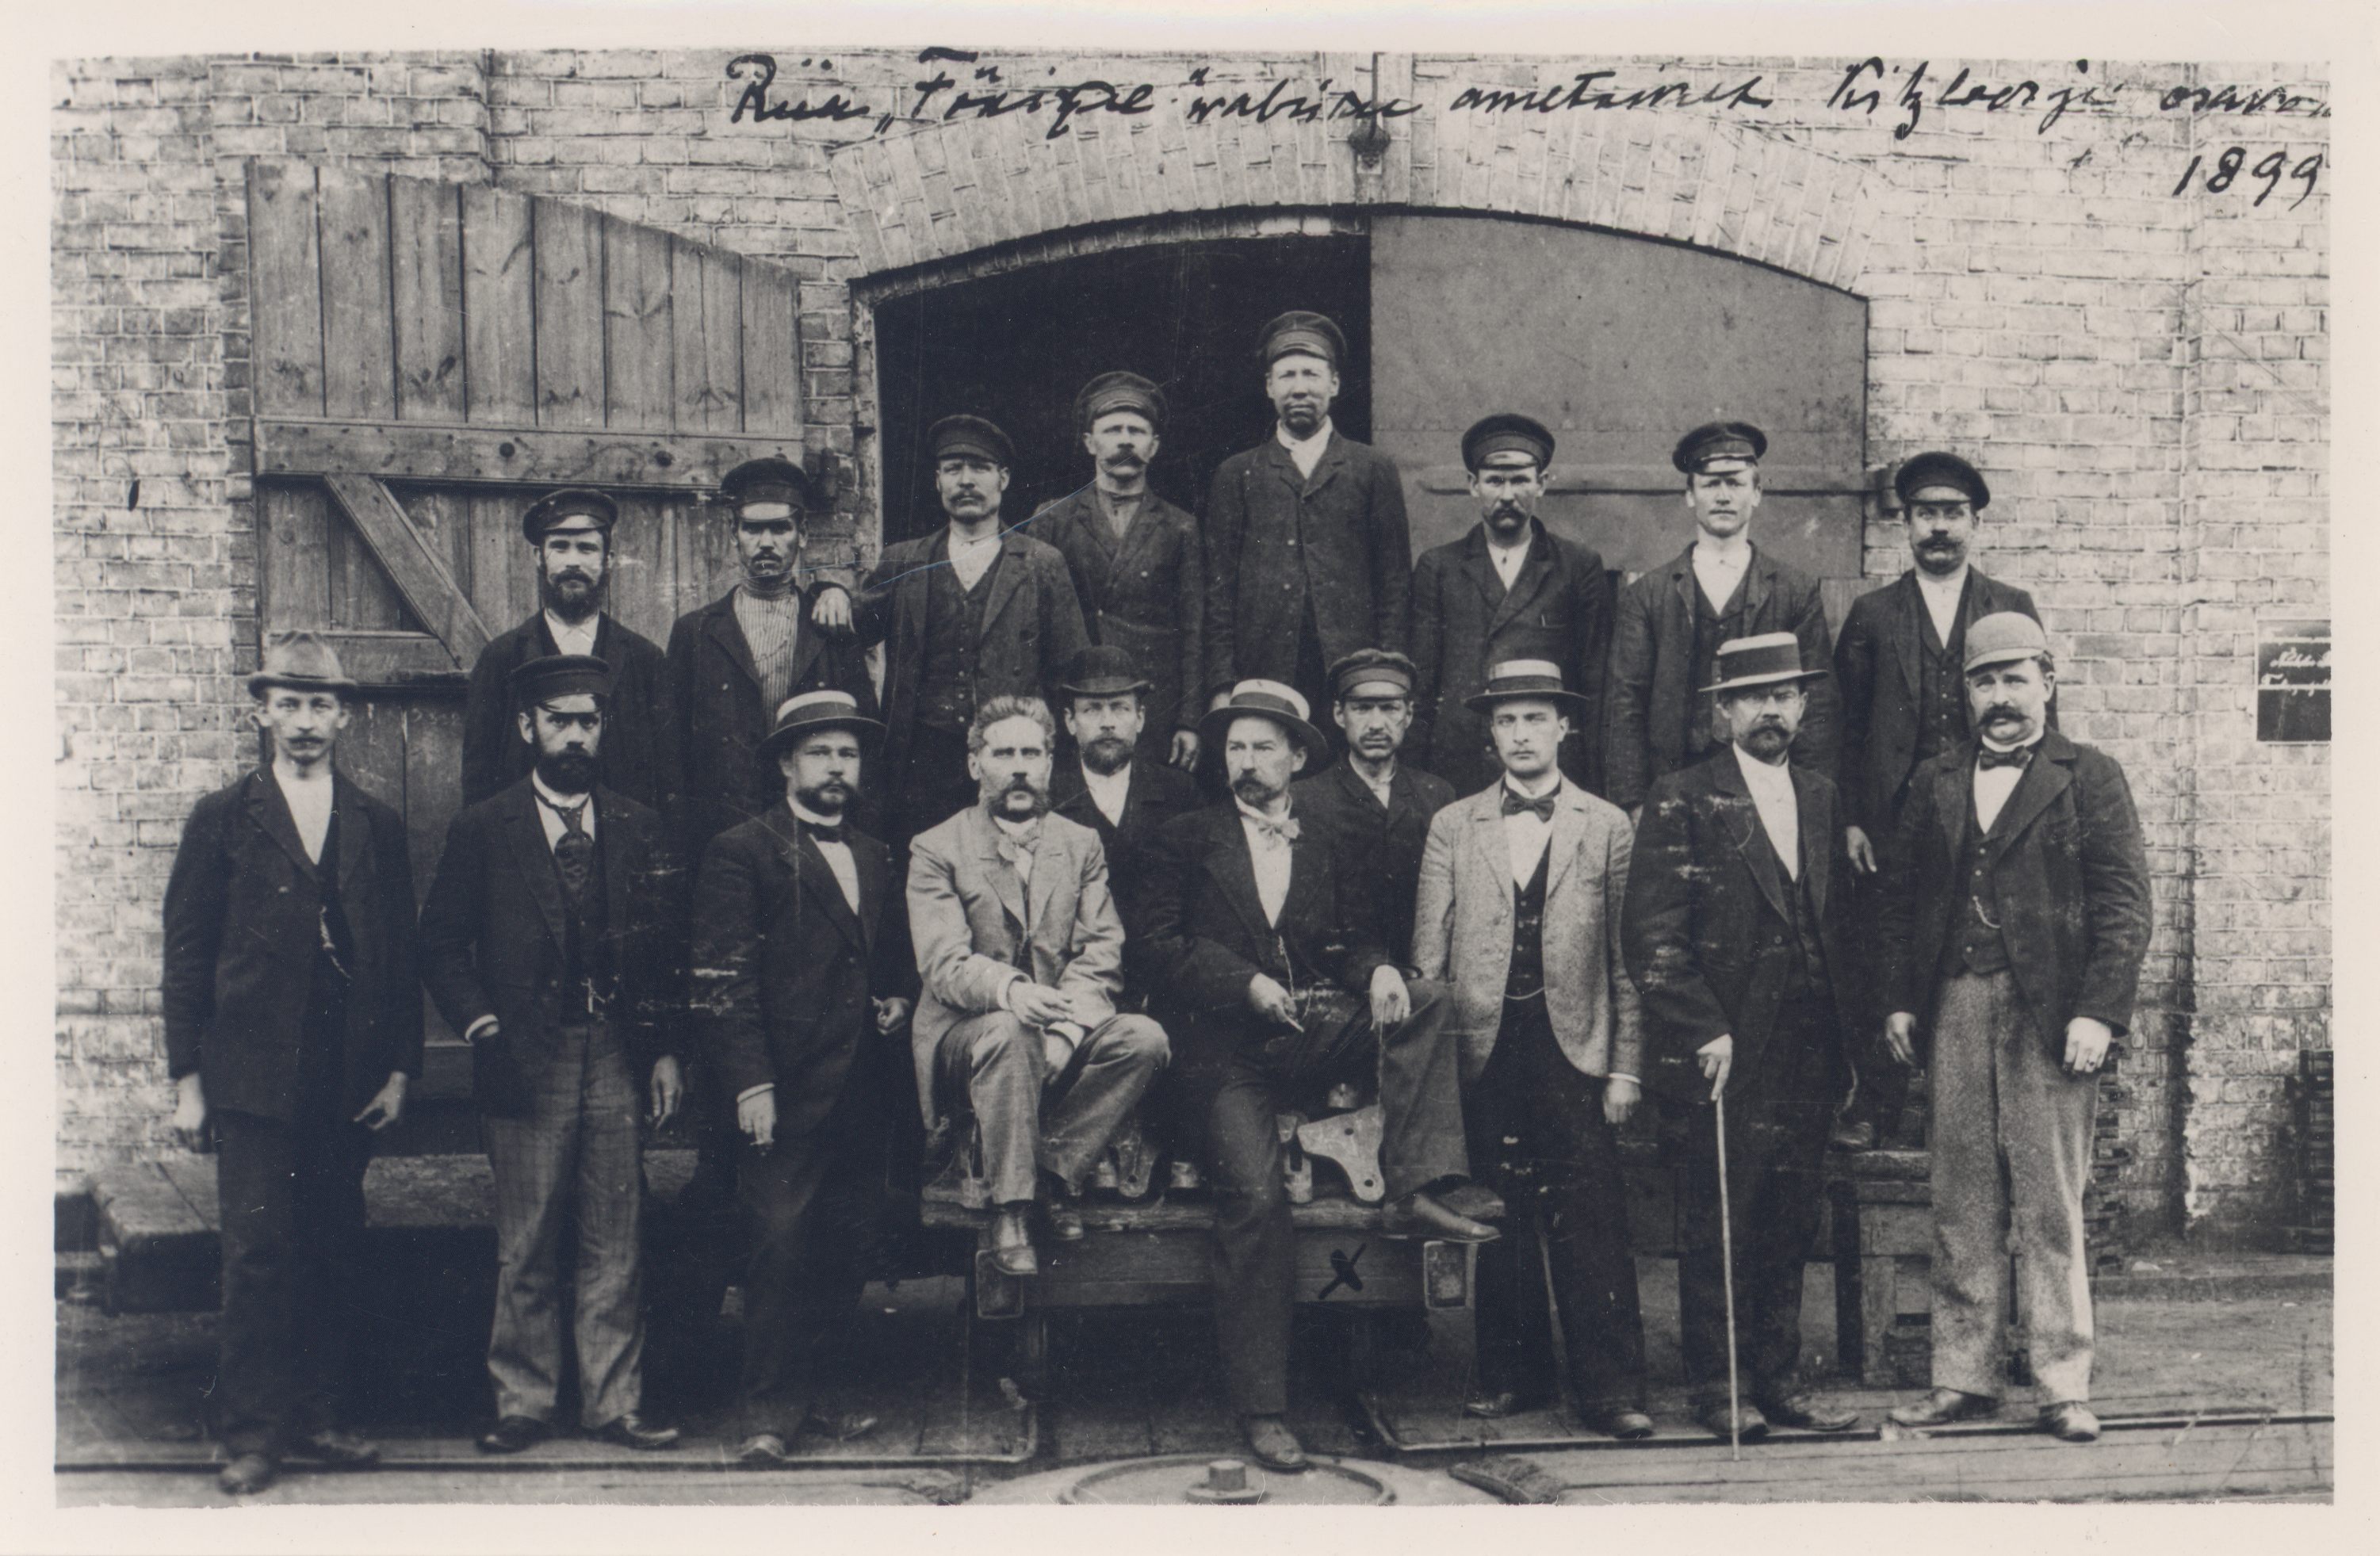 A. Kitzberg in Riga Phoenix\x92 factory at his department officials in the middle of 1899.